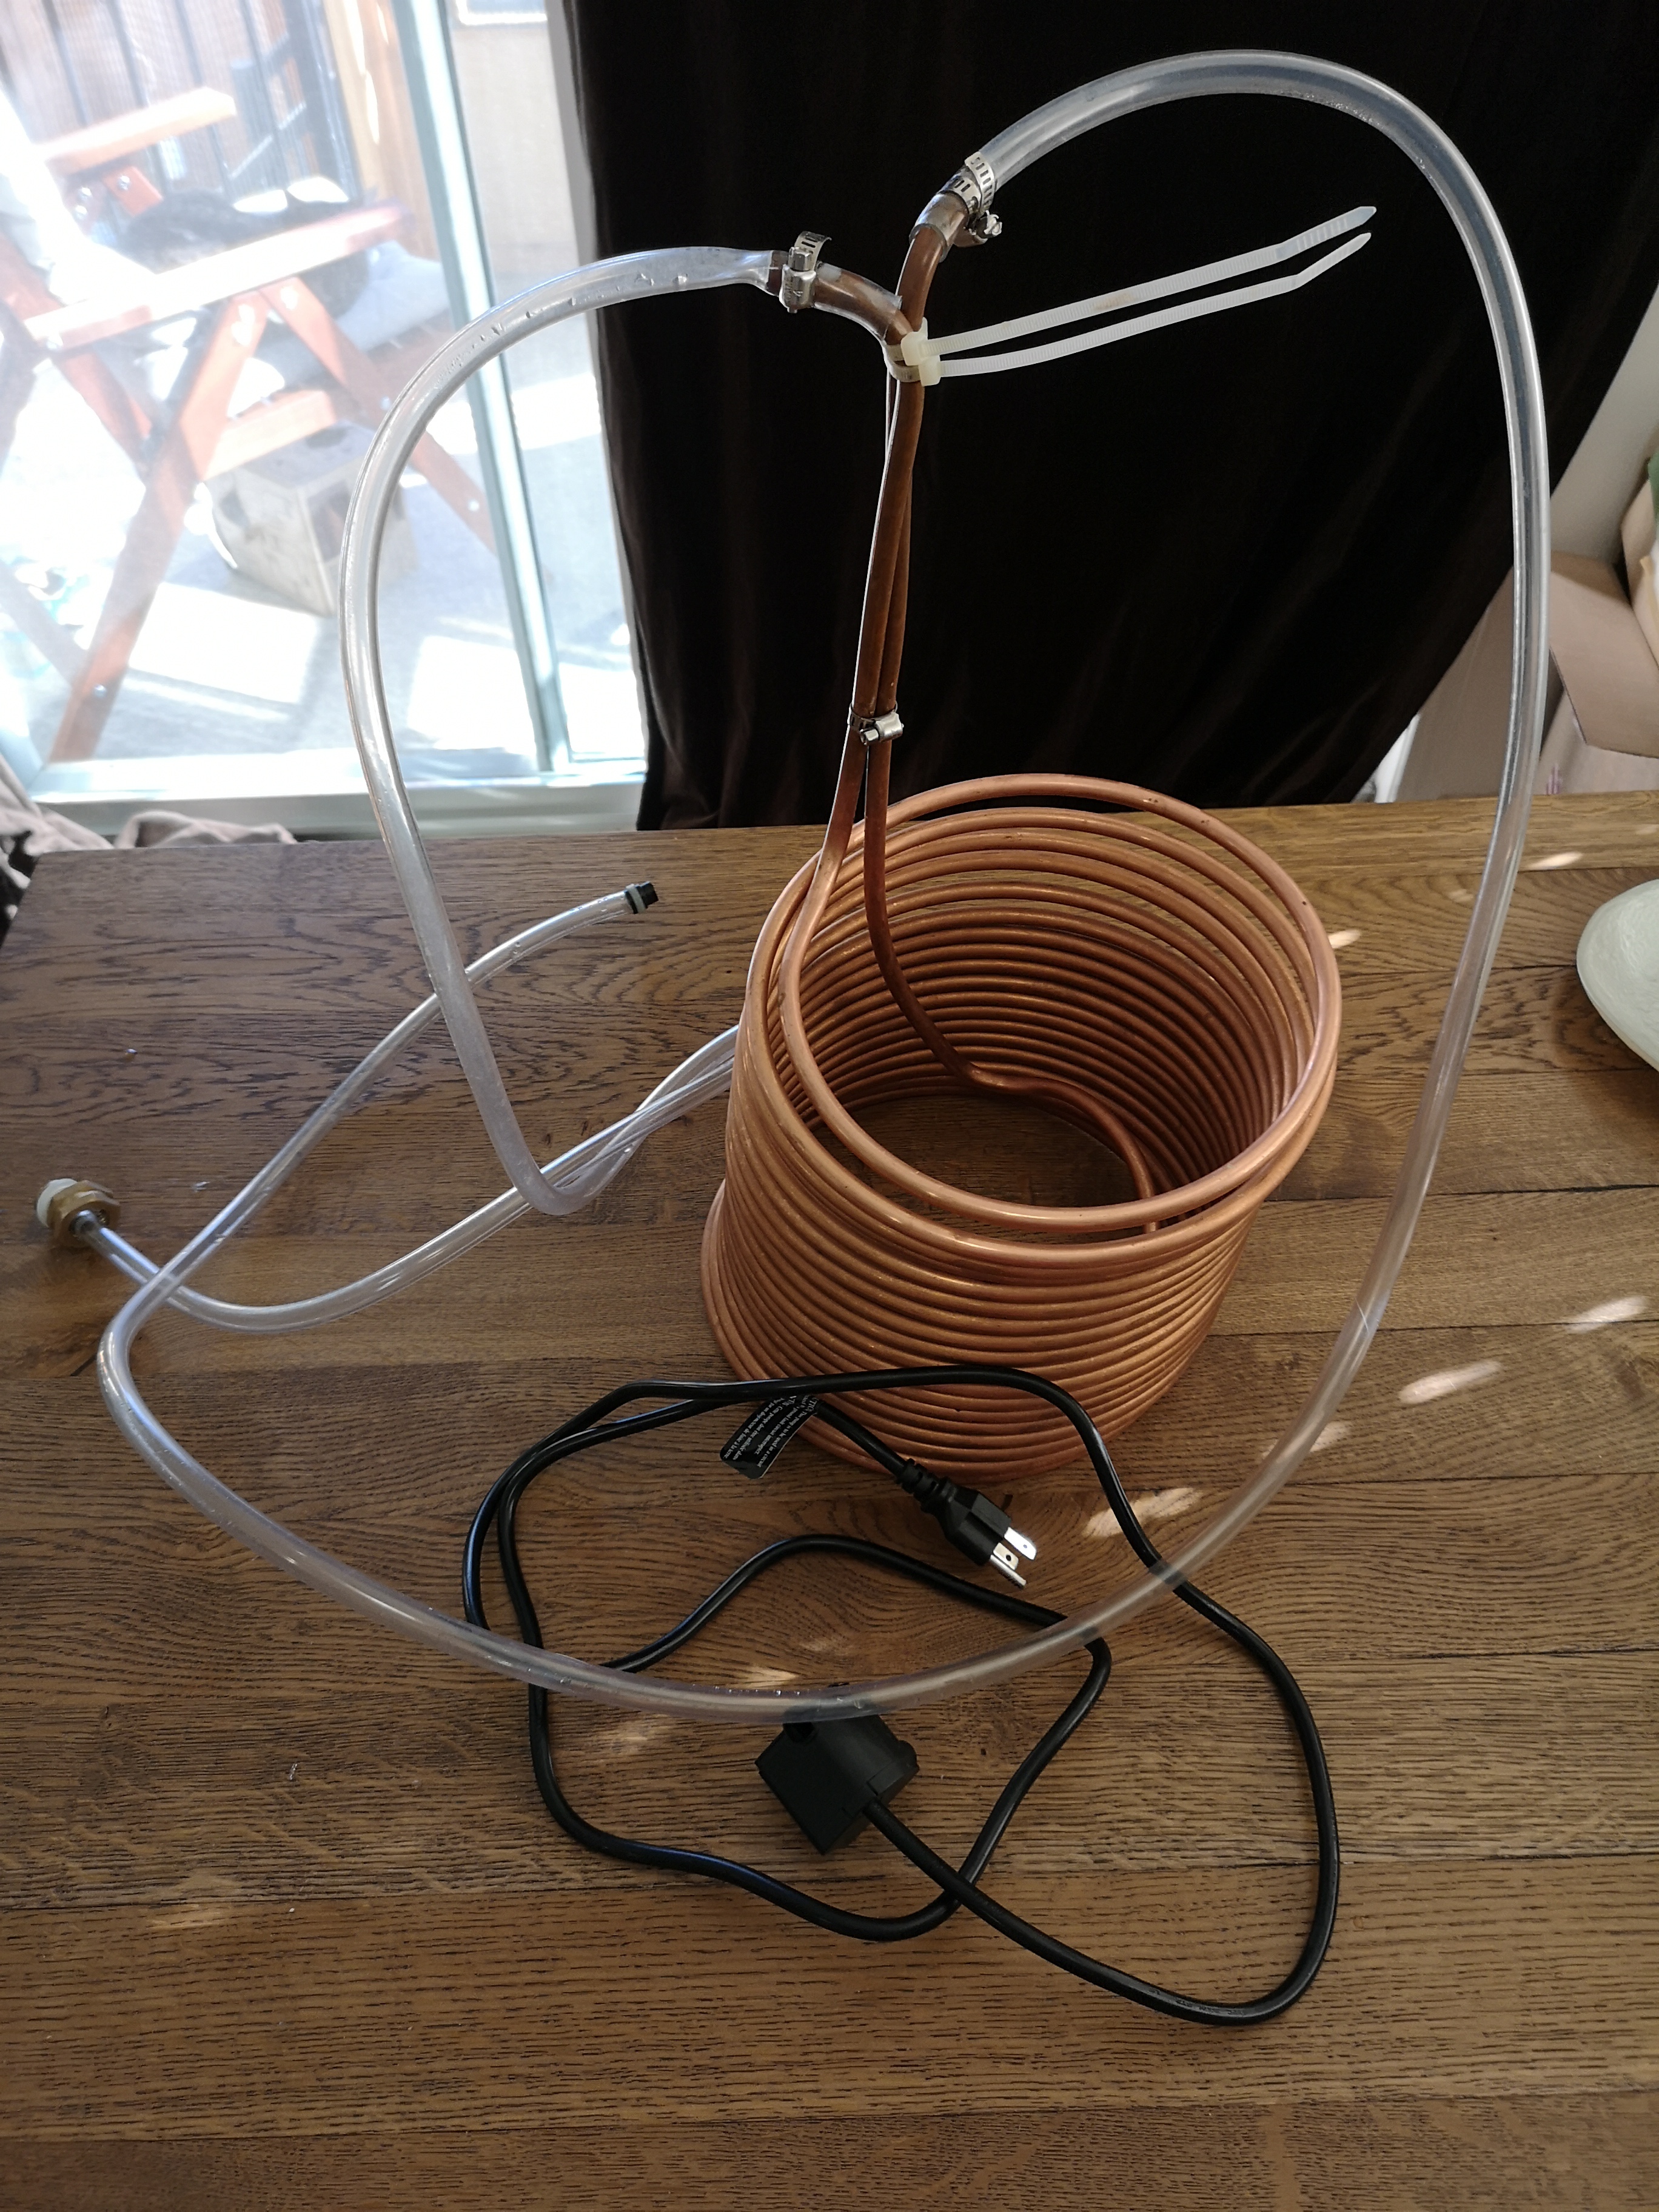 Beer cooling coil